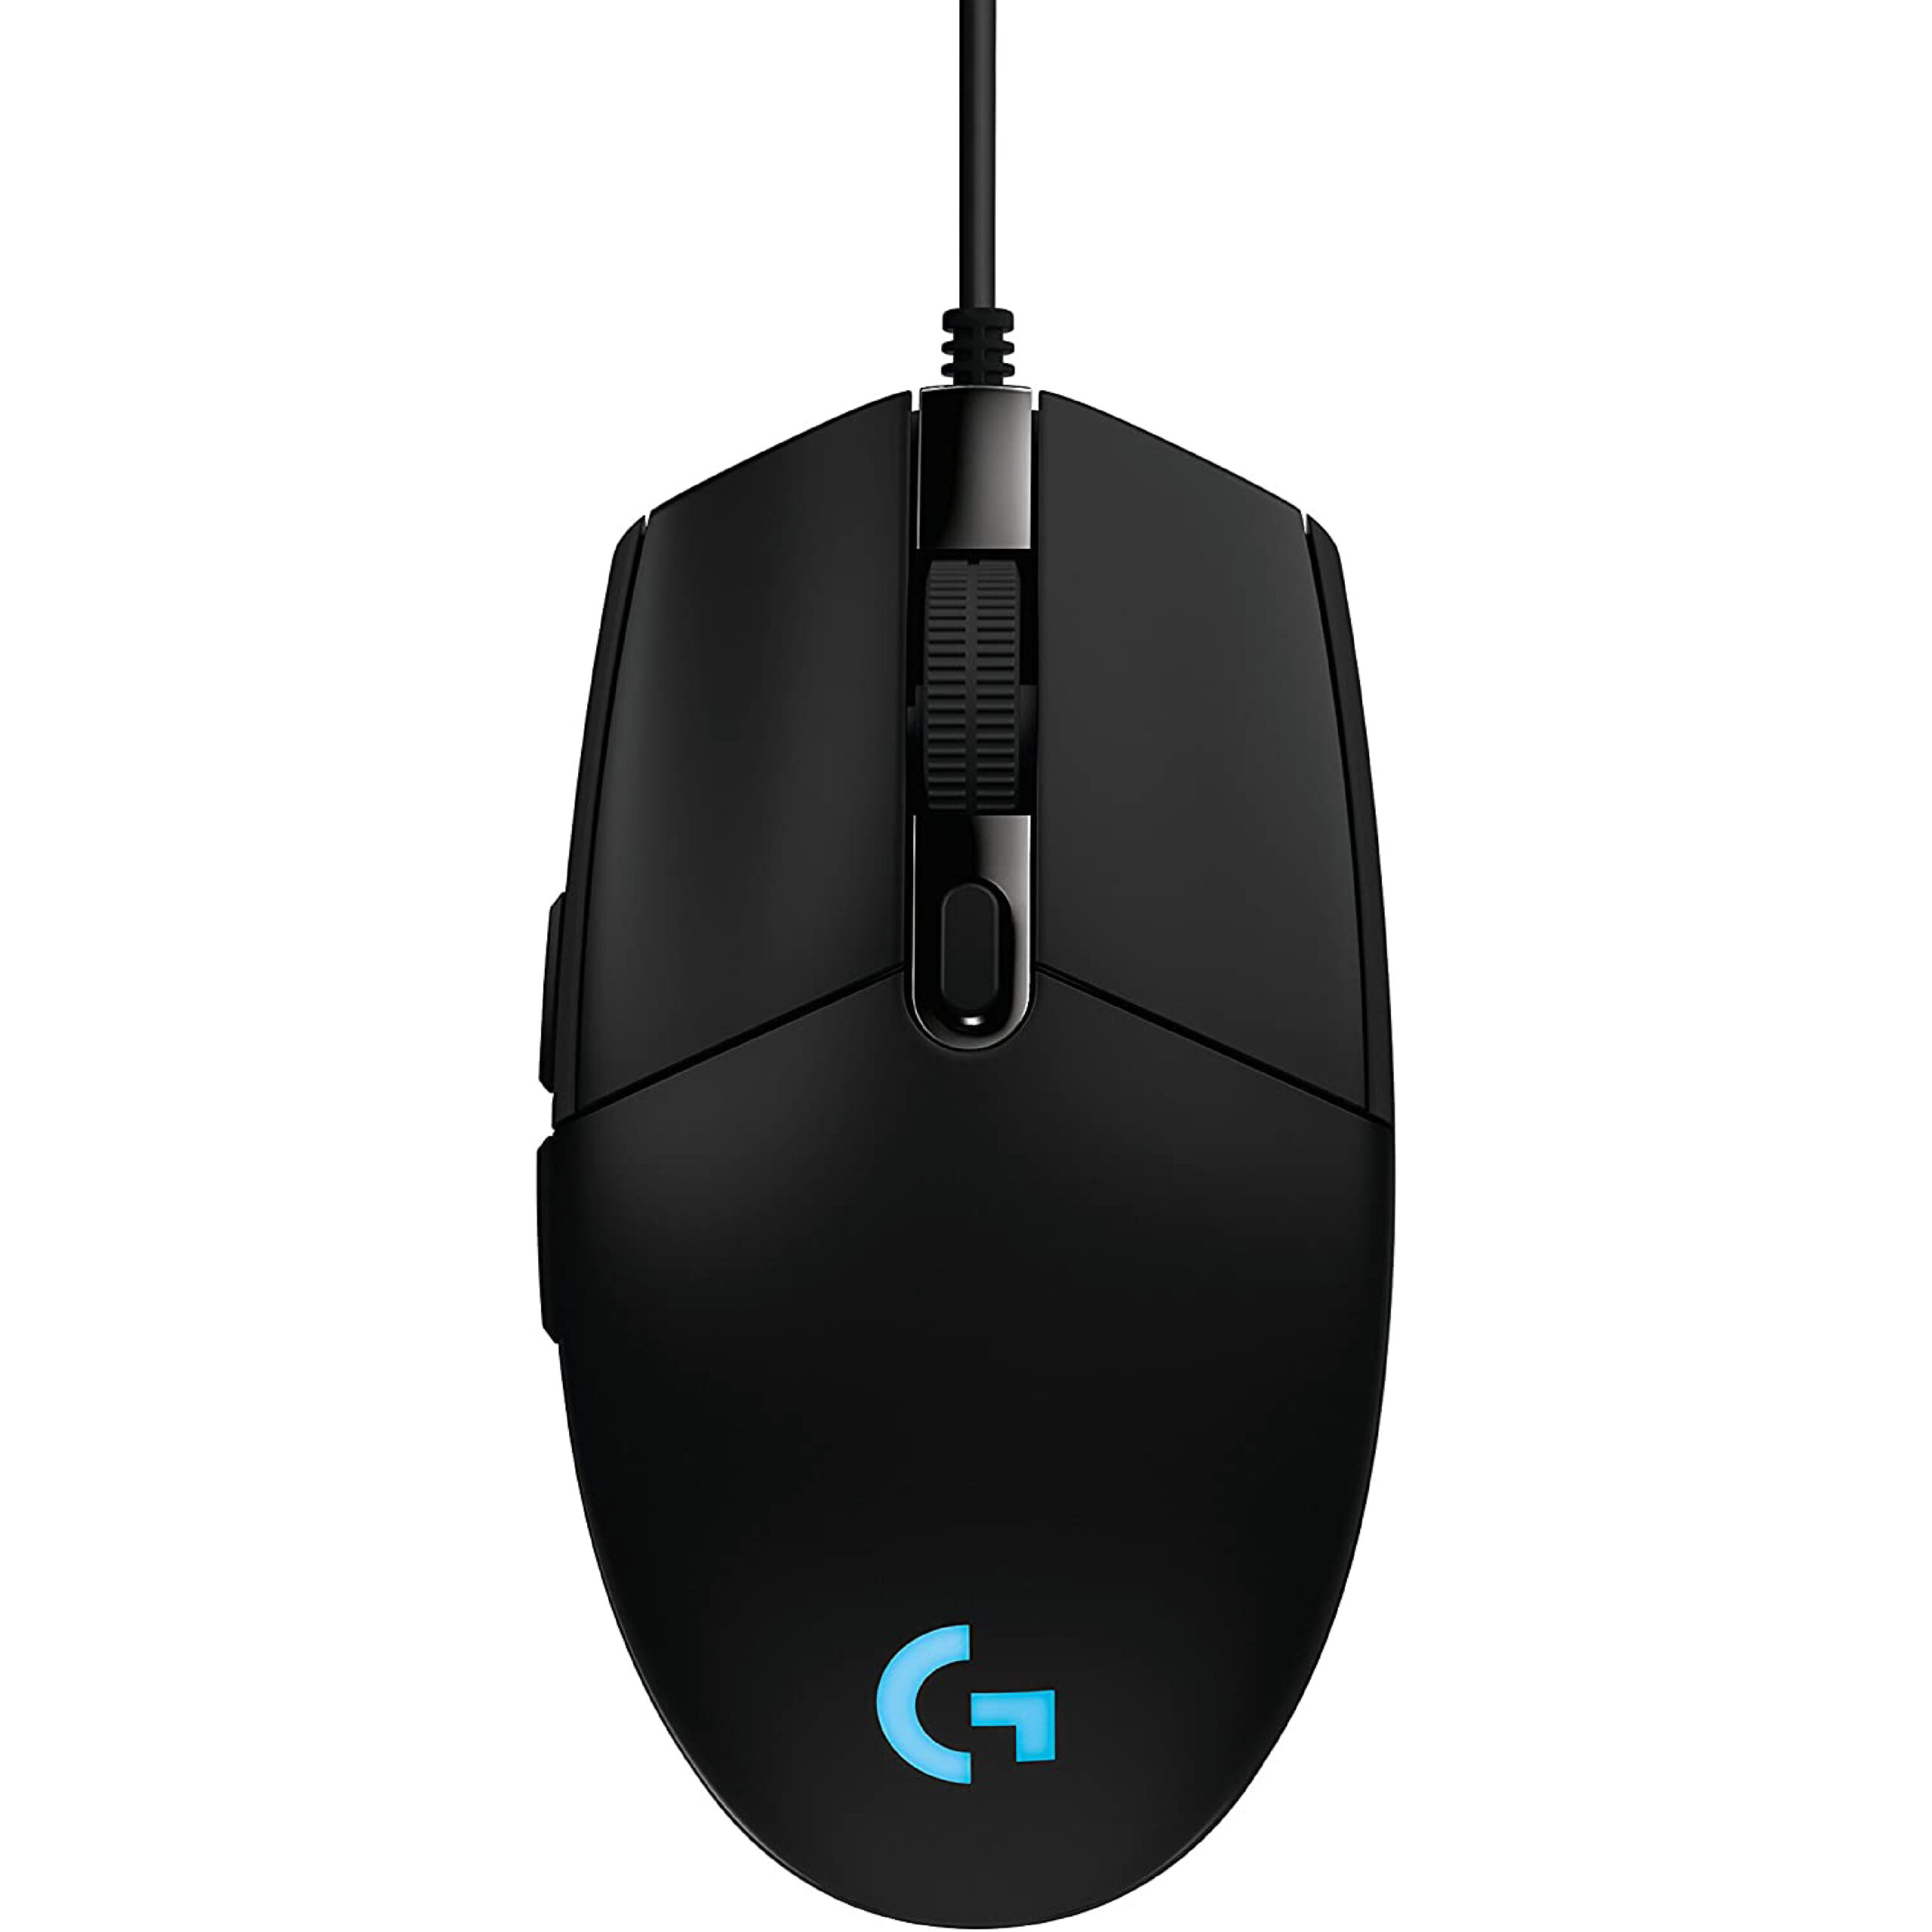 Logitech G203 Prodigy Gaming Mouse. Patrick Will's computer mouse for work.